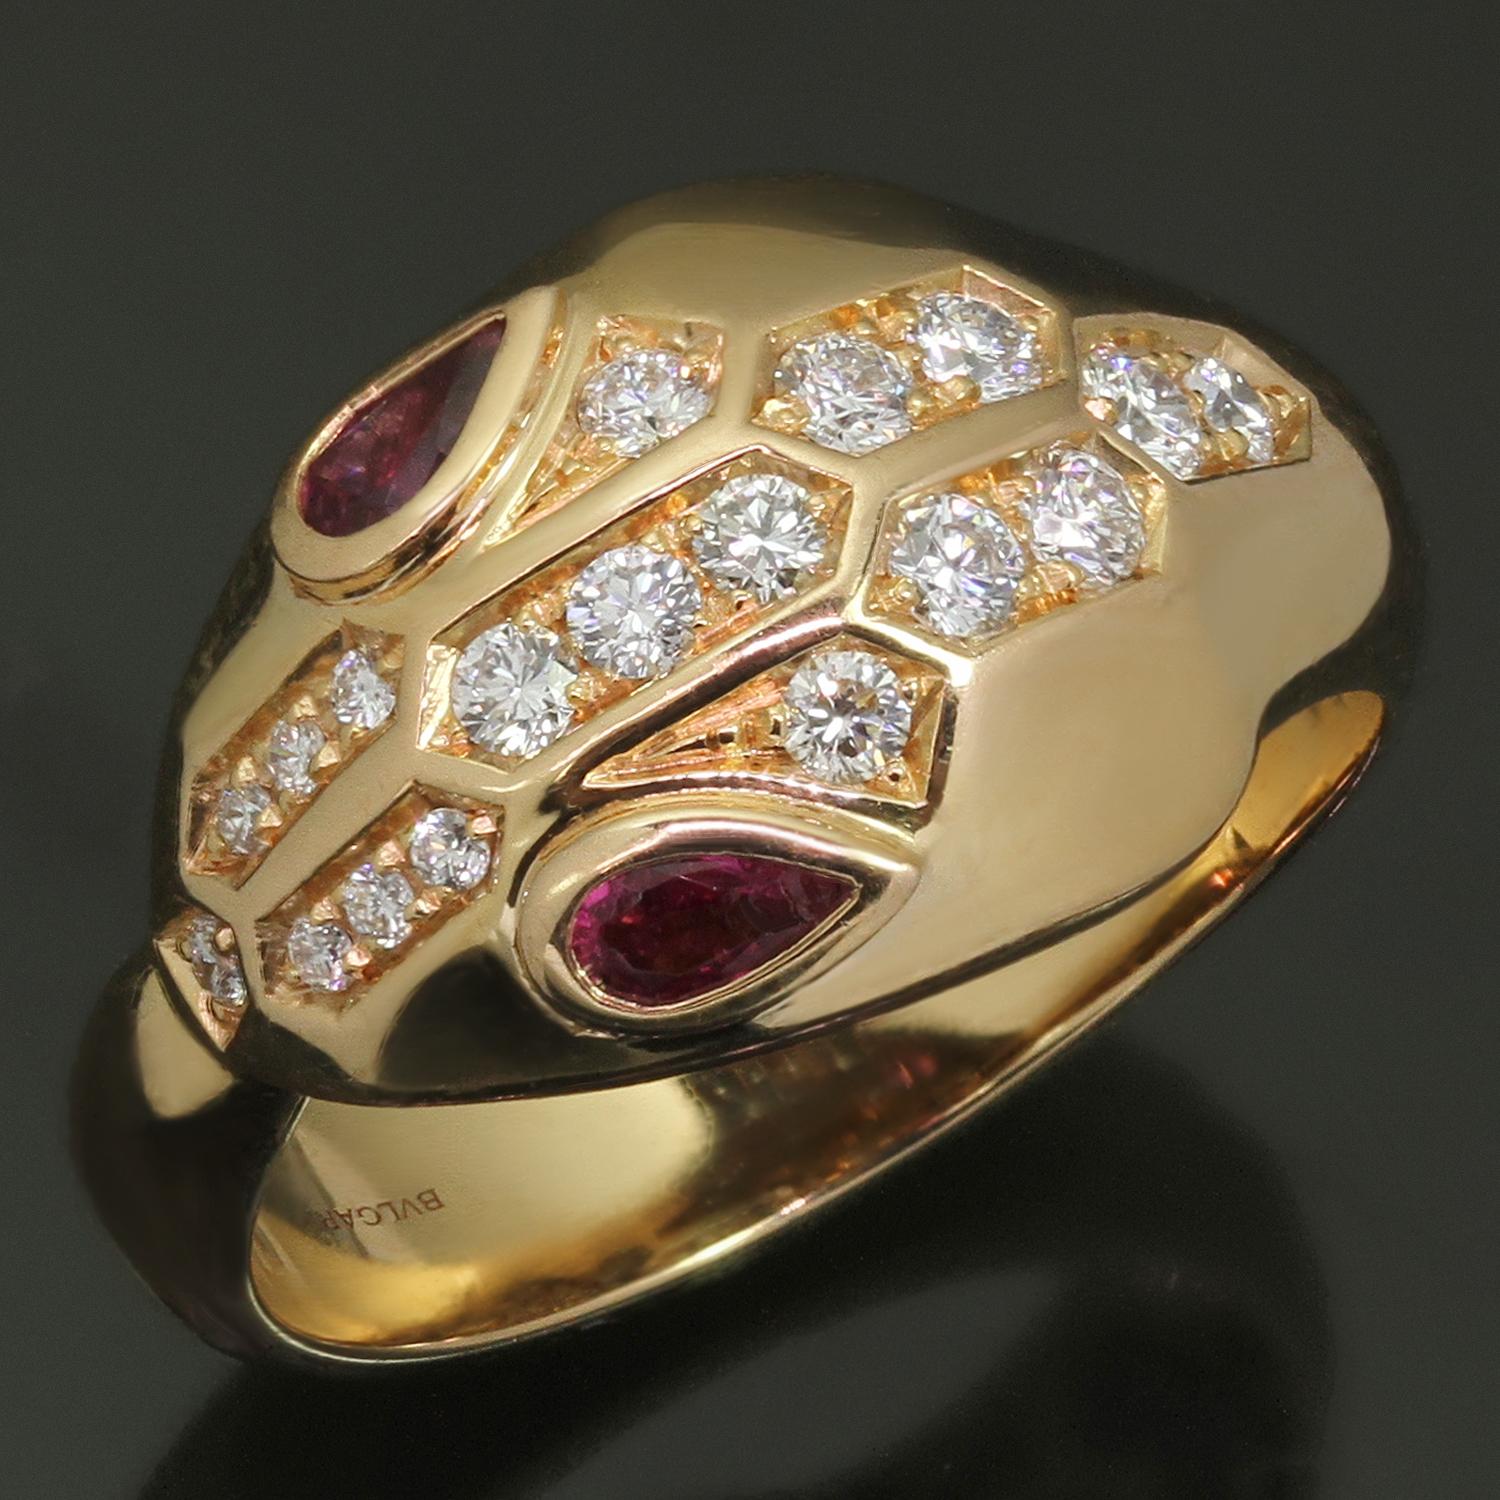 This stunning Bvlgari ring from the iconic Serpenti collection is crafted in 18k rose gold, set with a pair of rubellite eyes and pave-set with round brilliant E-F-G VVS2-VS1 diamonds. Made in Italy circa 2016. Measurements: 0.66